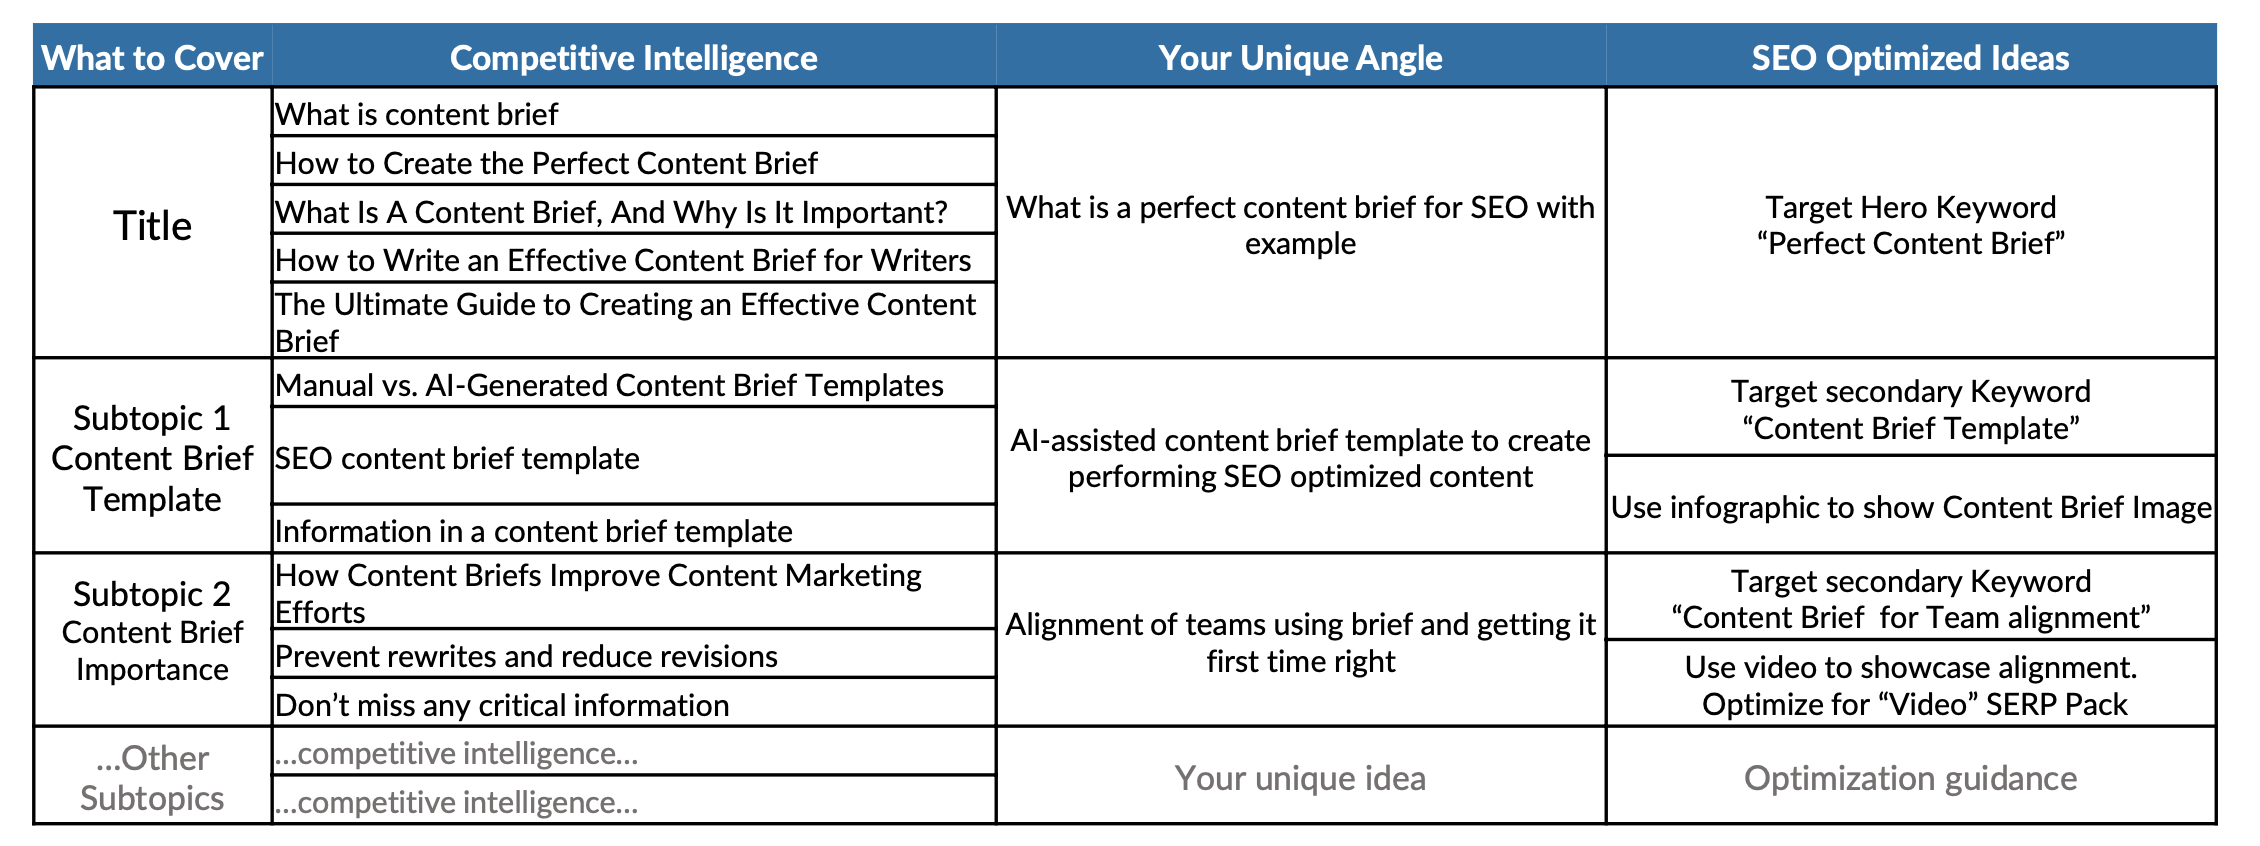 How We Create The Perfect SEO Brief That Aligns Teams & Beats Competition